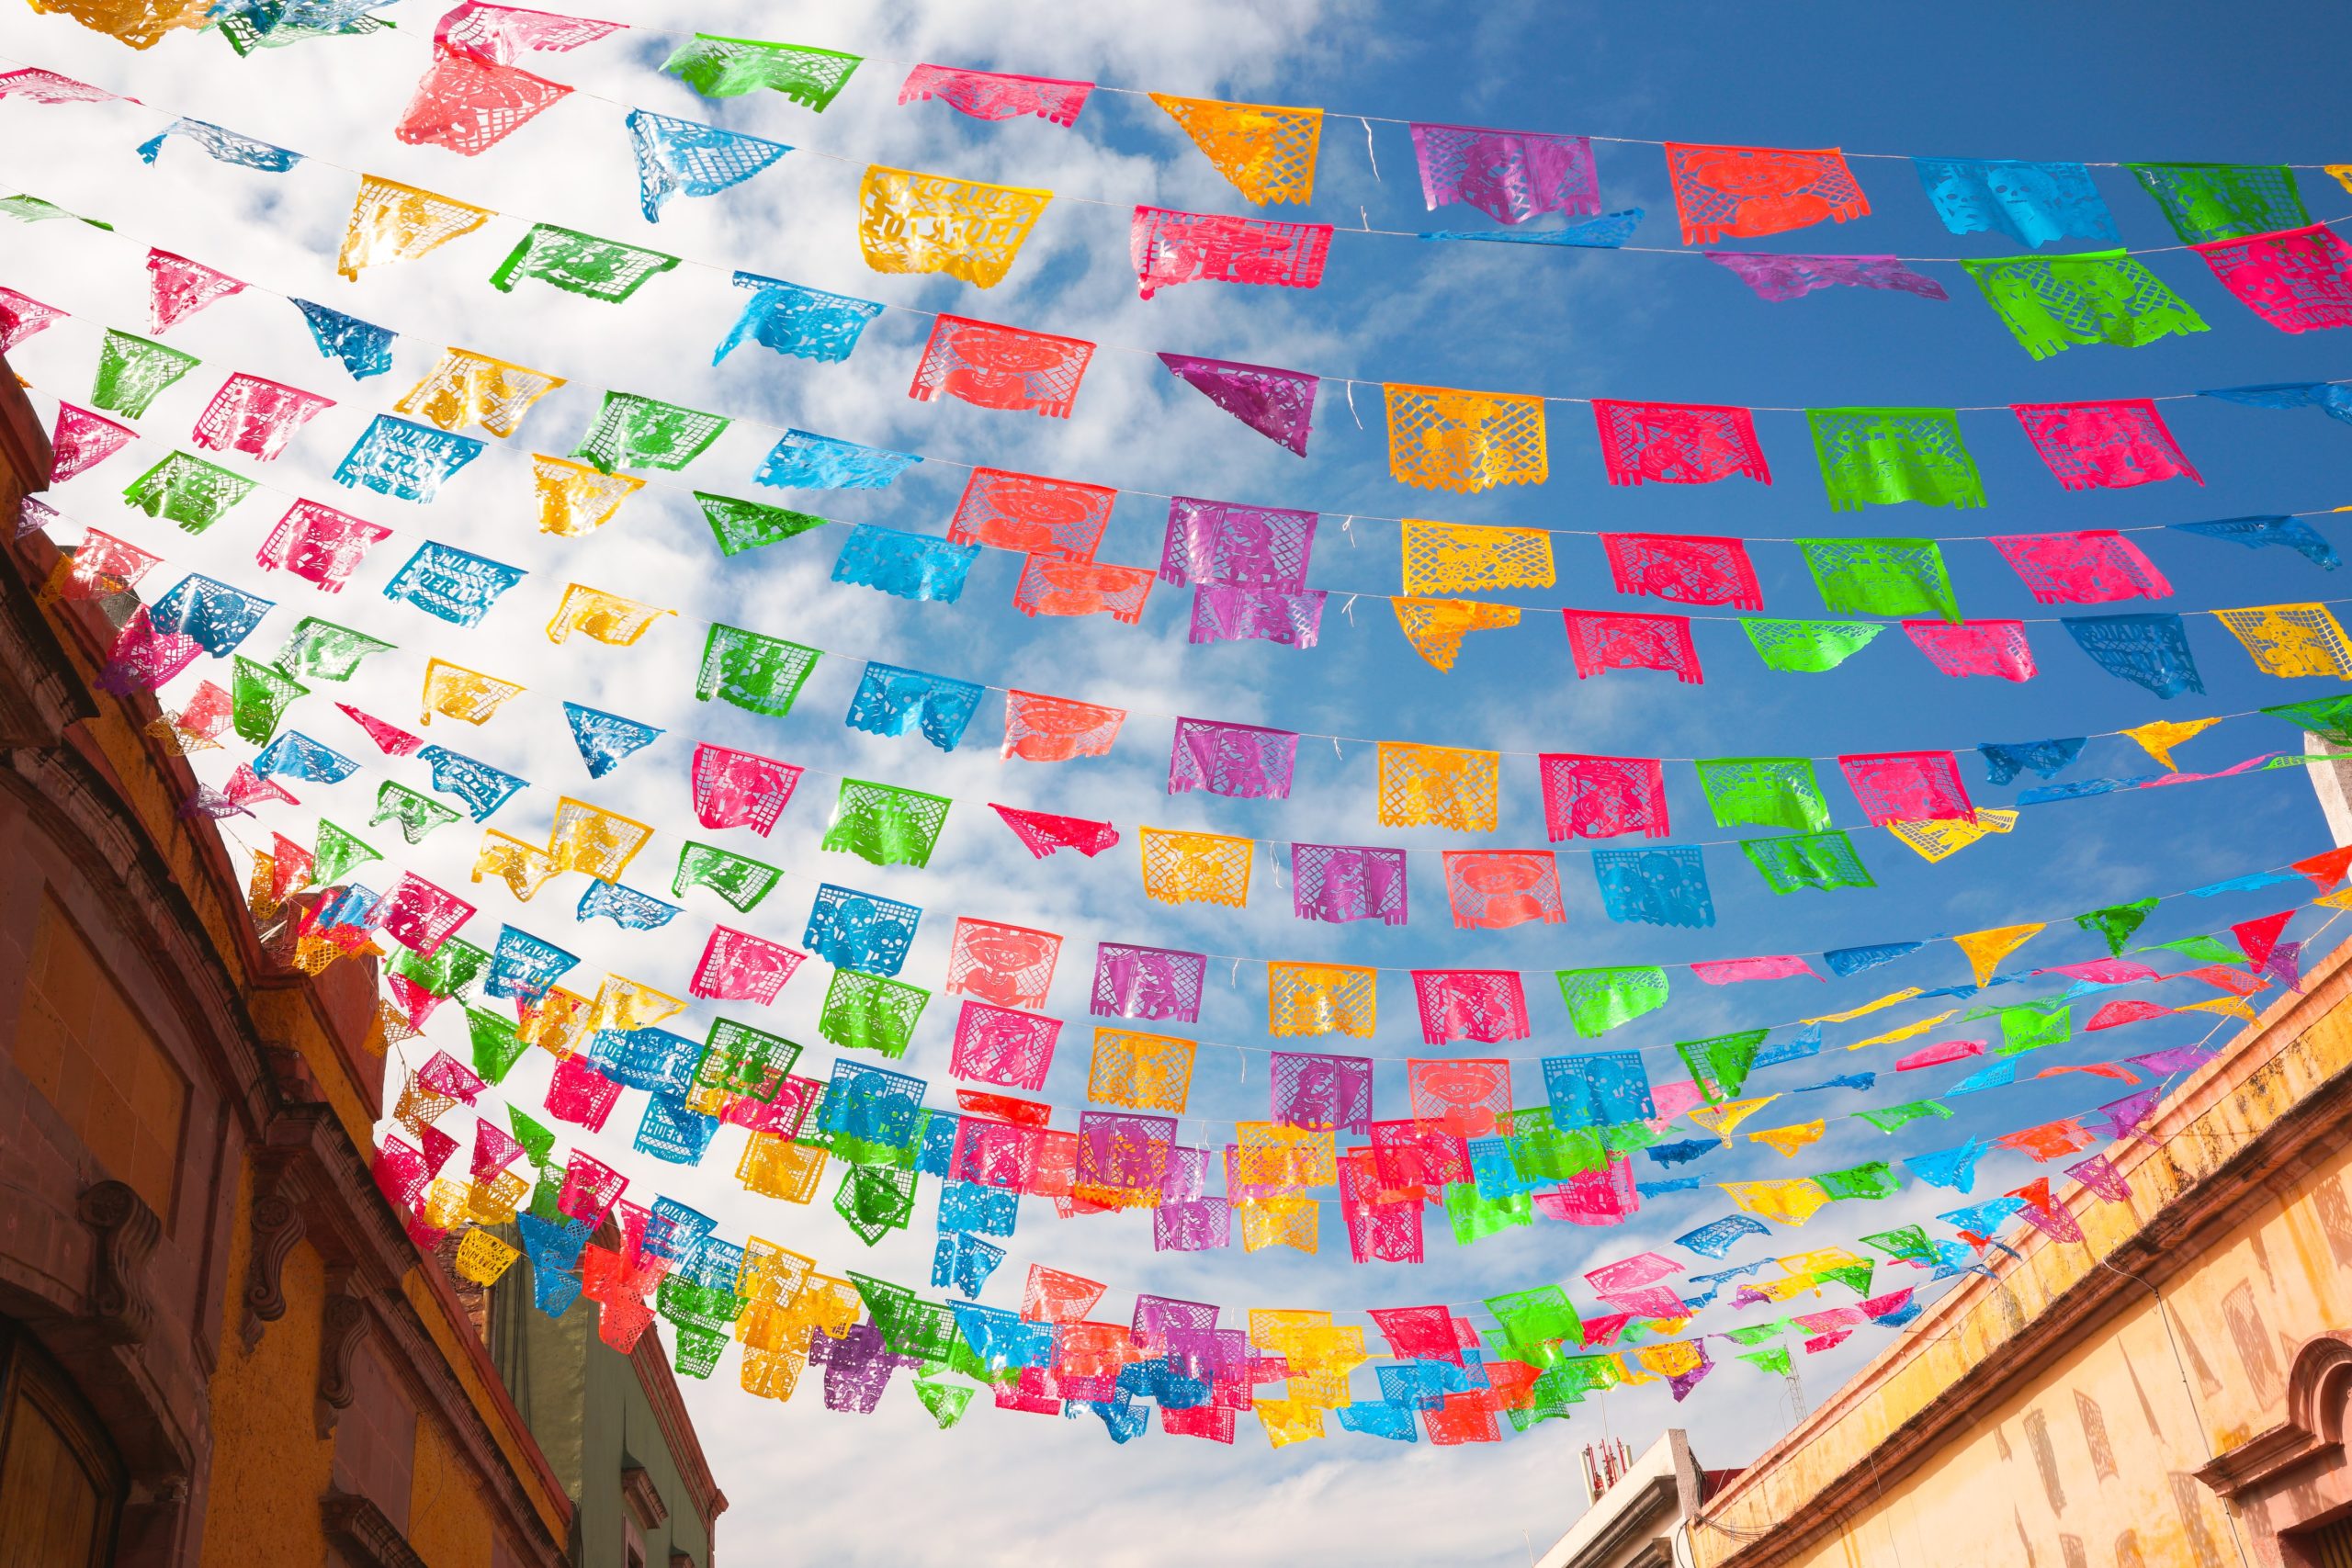 Paper Craft Ideas for Hispanic Heritage Month - Project Learning Tree